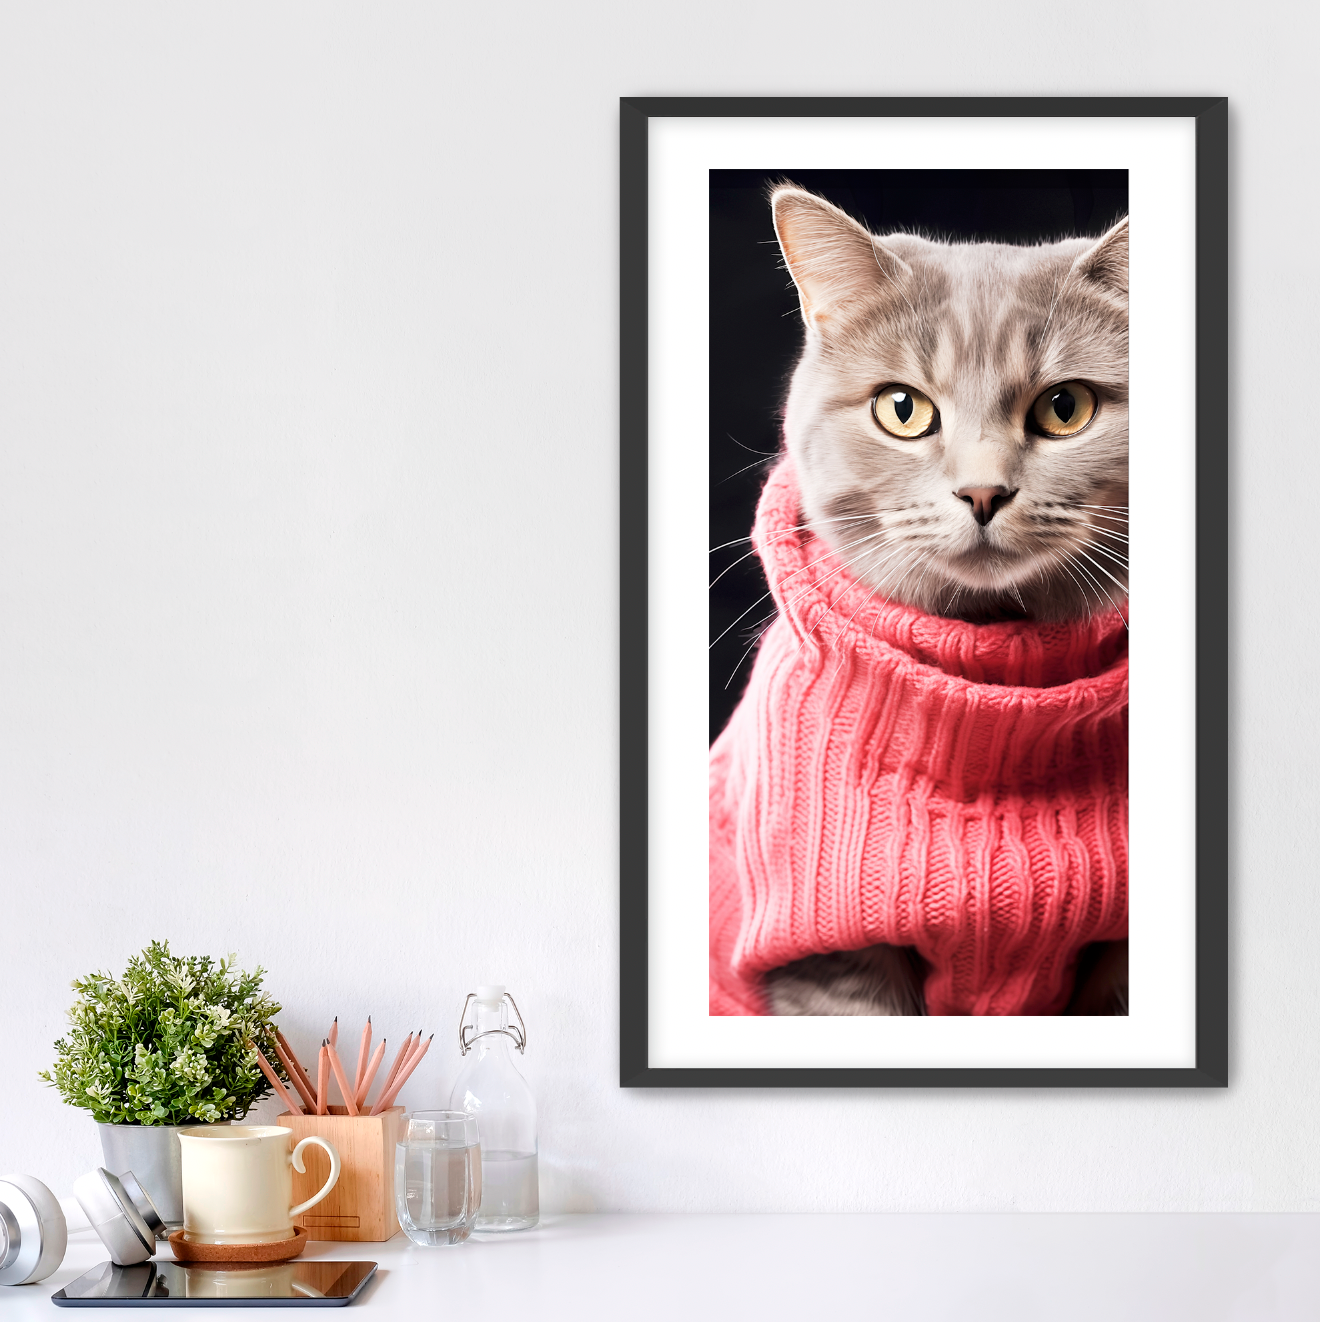 Photographic art of gret cat wearing pink turtle neck sweater. Elongated vertical art with white mat and black frame. customconcepts.art